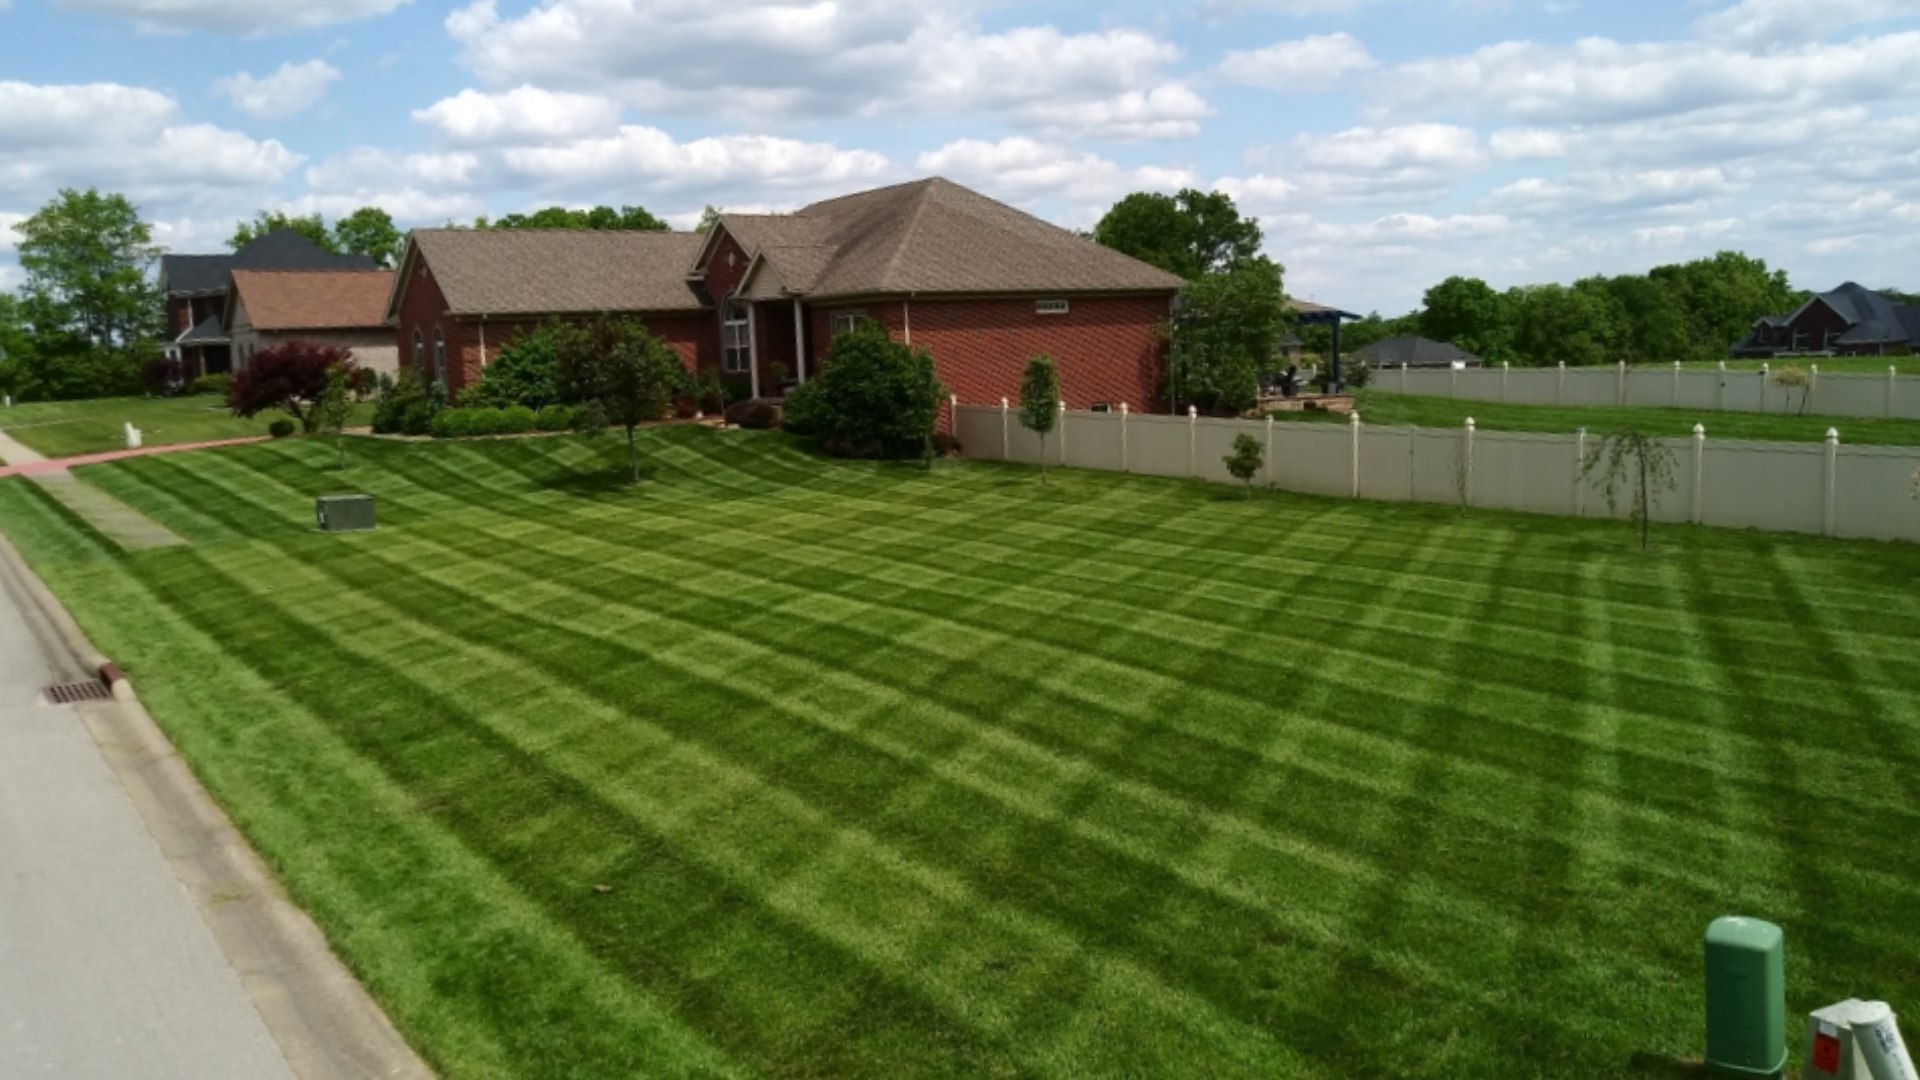 Lawn patterns added after mowing services in Clark County, IN.